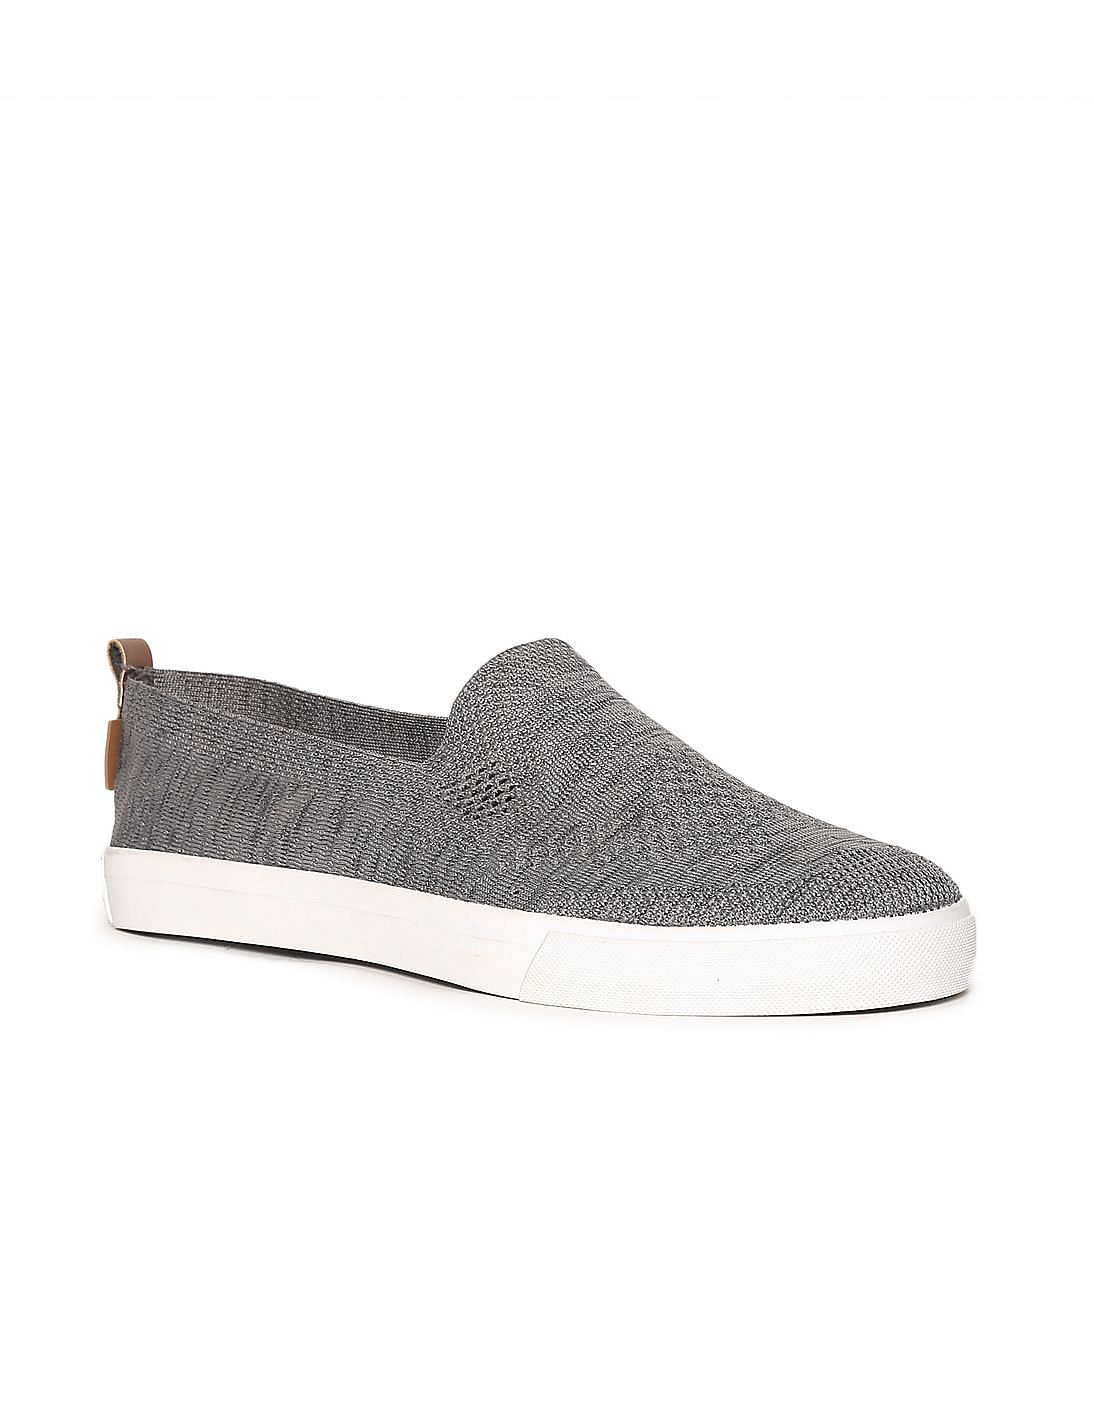 Buy U.S. Polo Assn. Low Top Perforated Slip On Julias Shoes - NNNOW.com